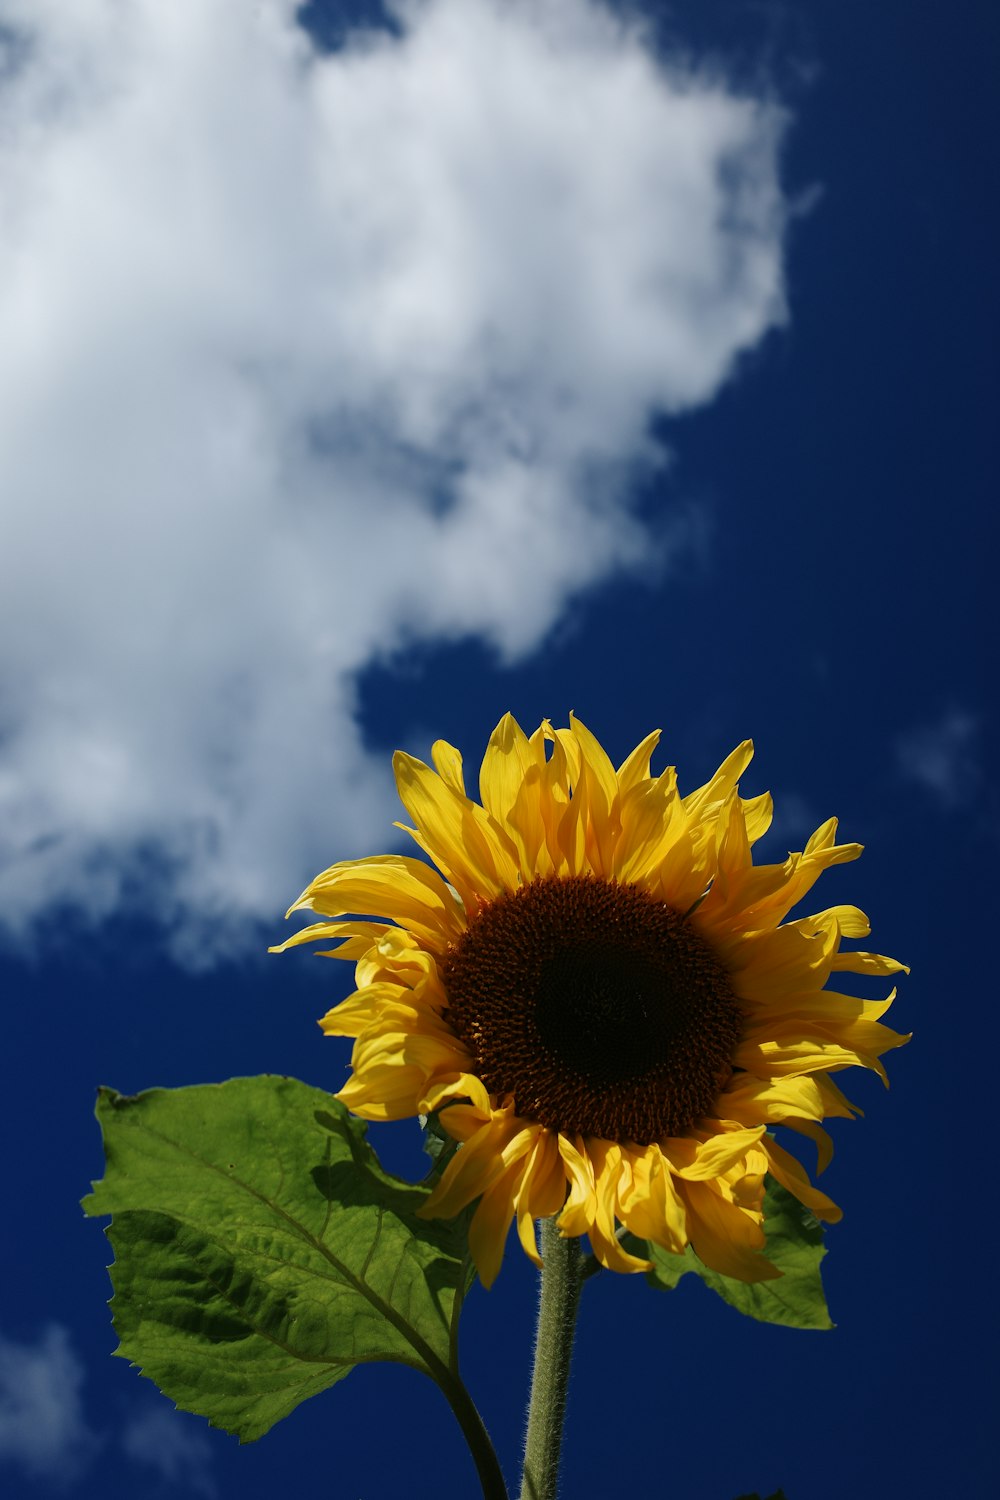 yellow sunflower under white clouds and blue sky during daytime